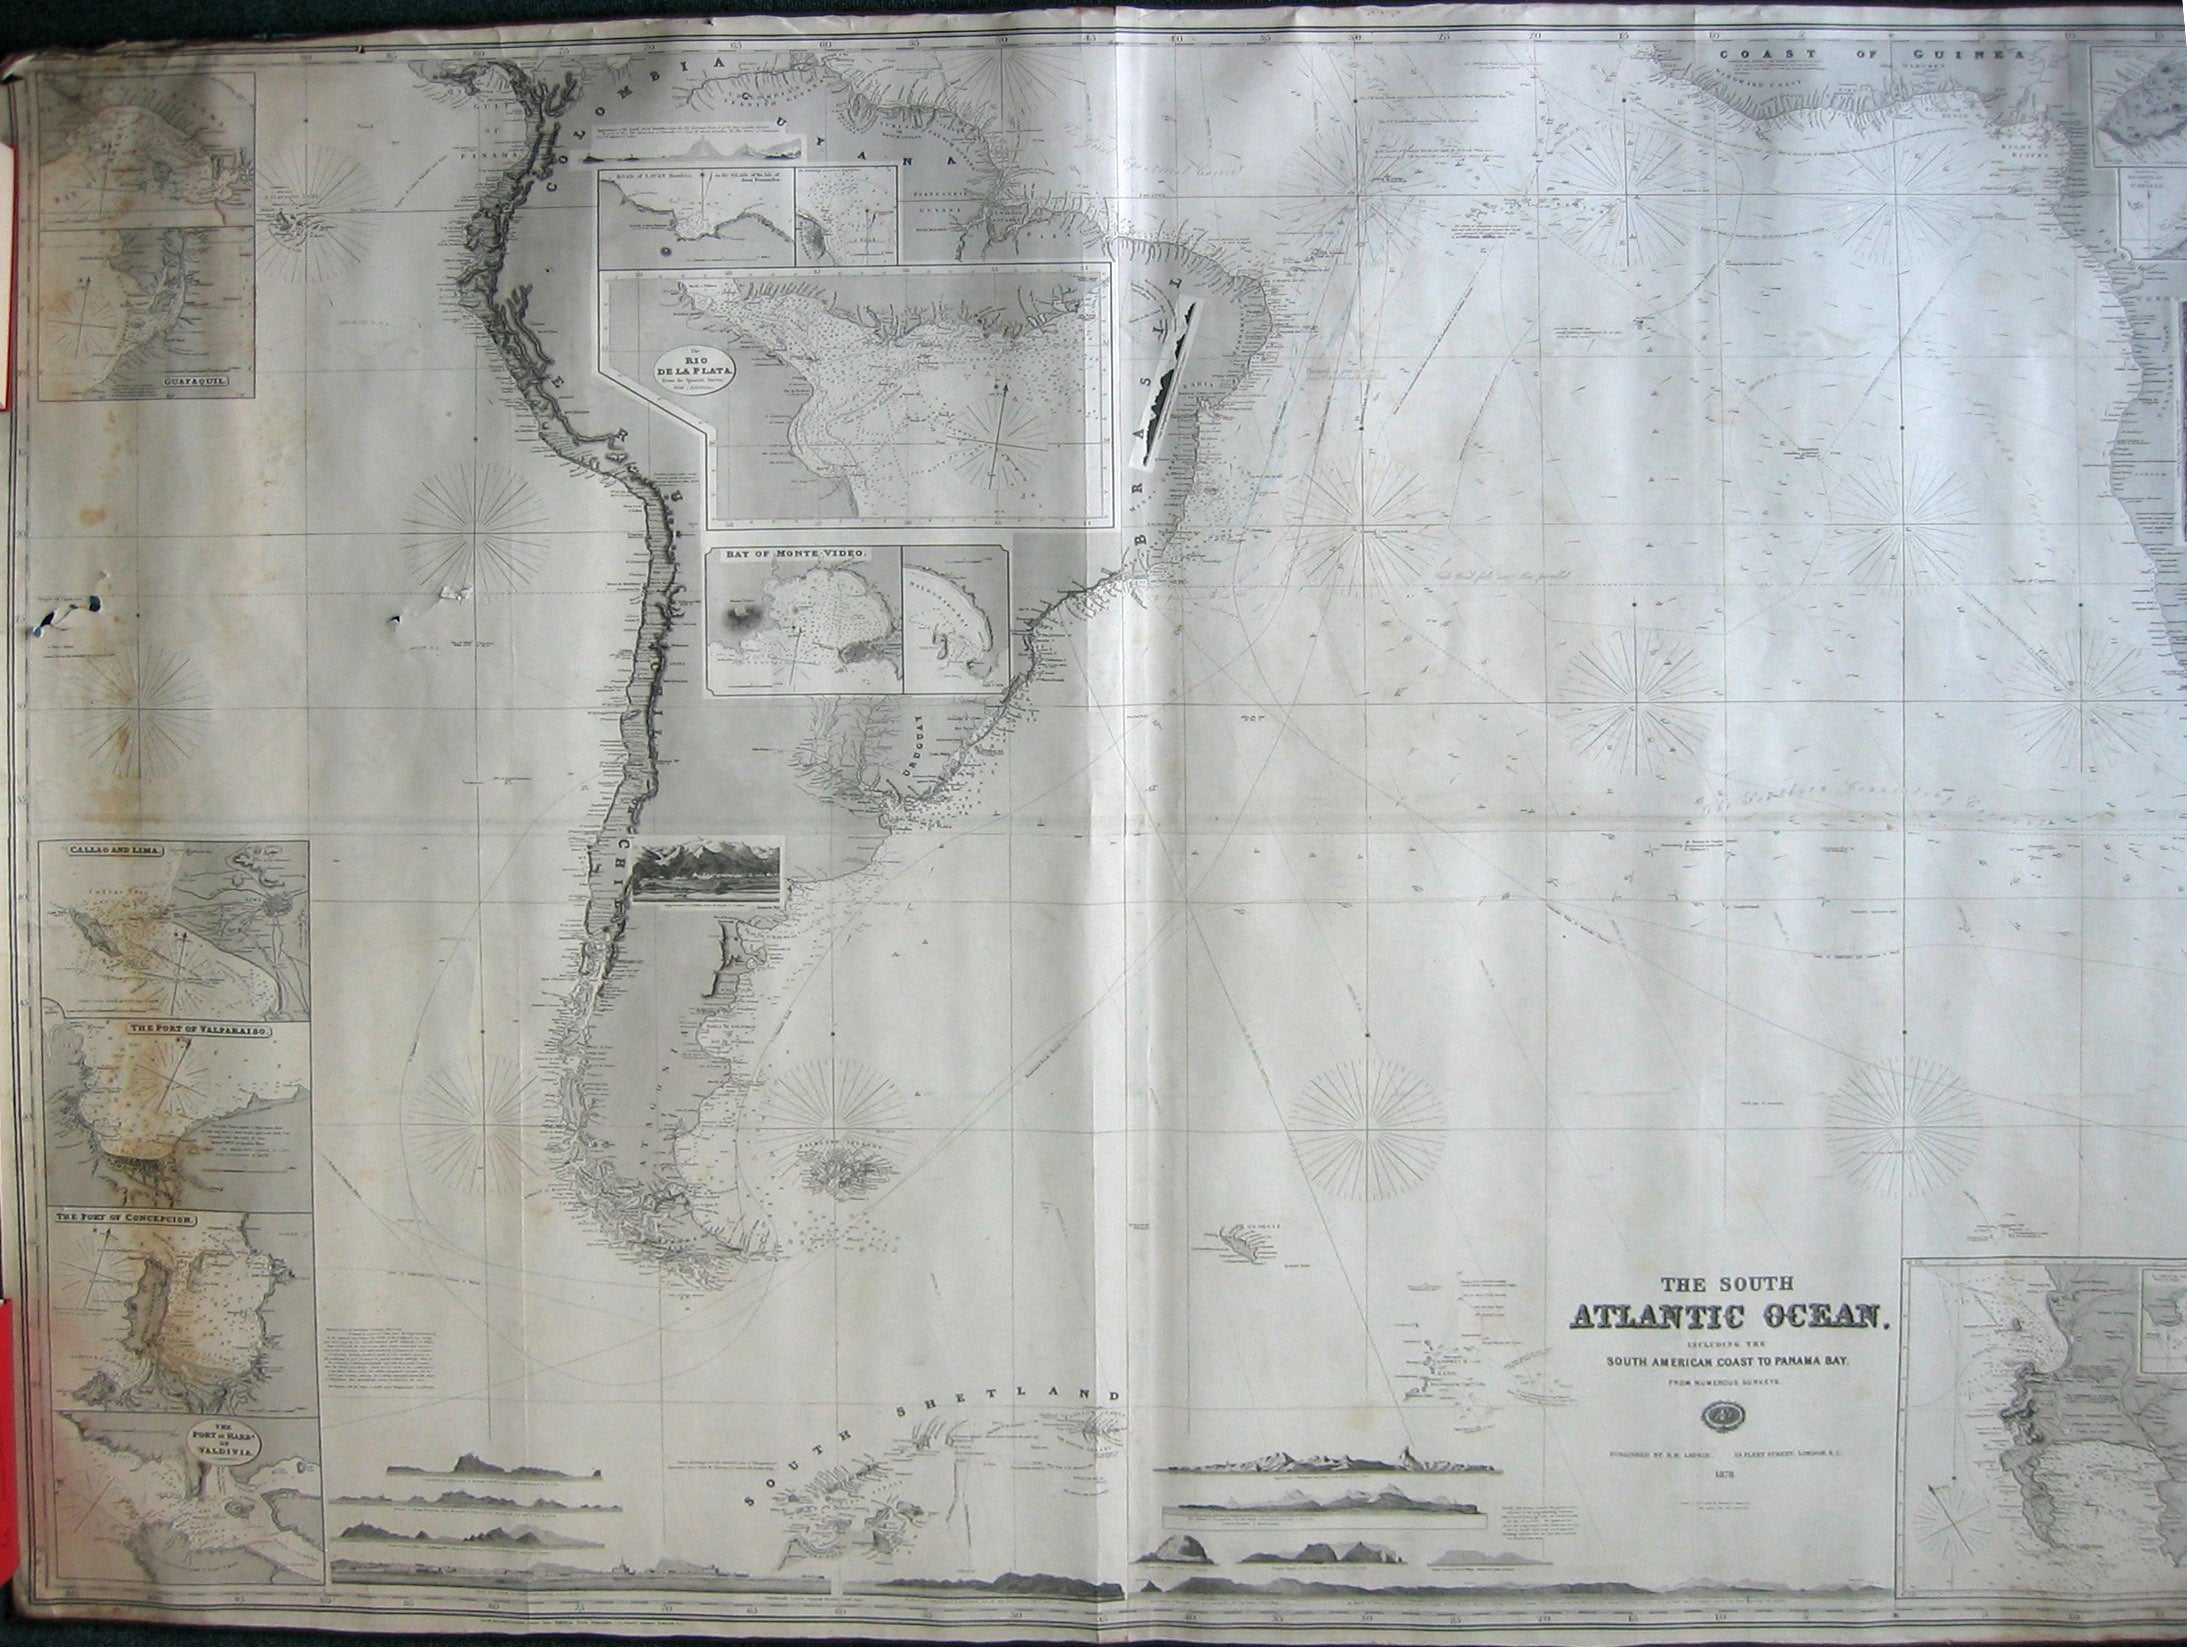 R. H. Laurie: The South Atlantic Ocean including the South America Coast to Panama Bay, 1887 [Blueback sea chart]